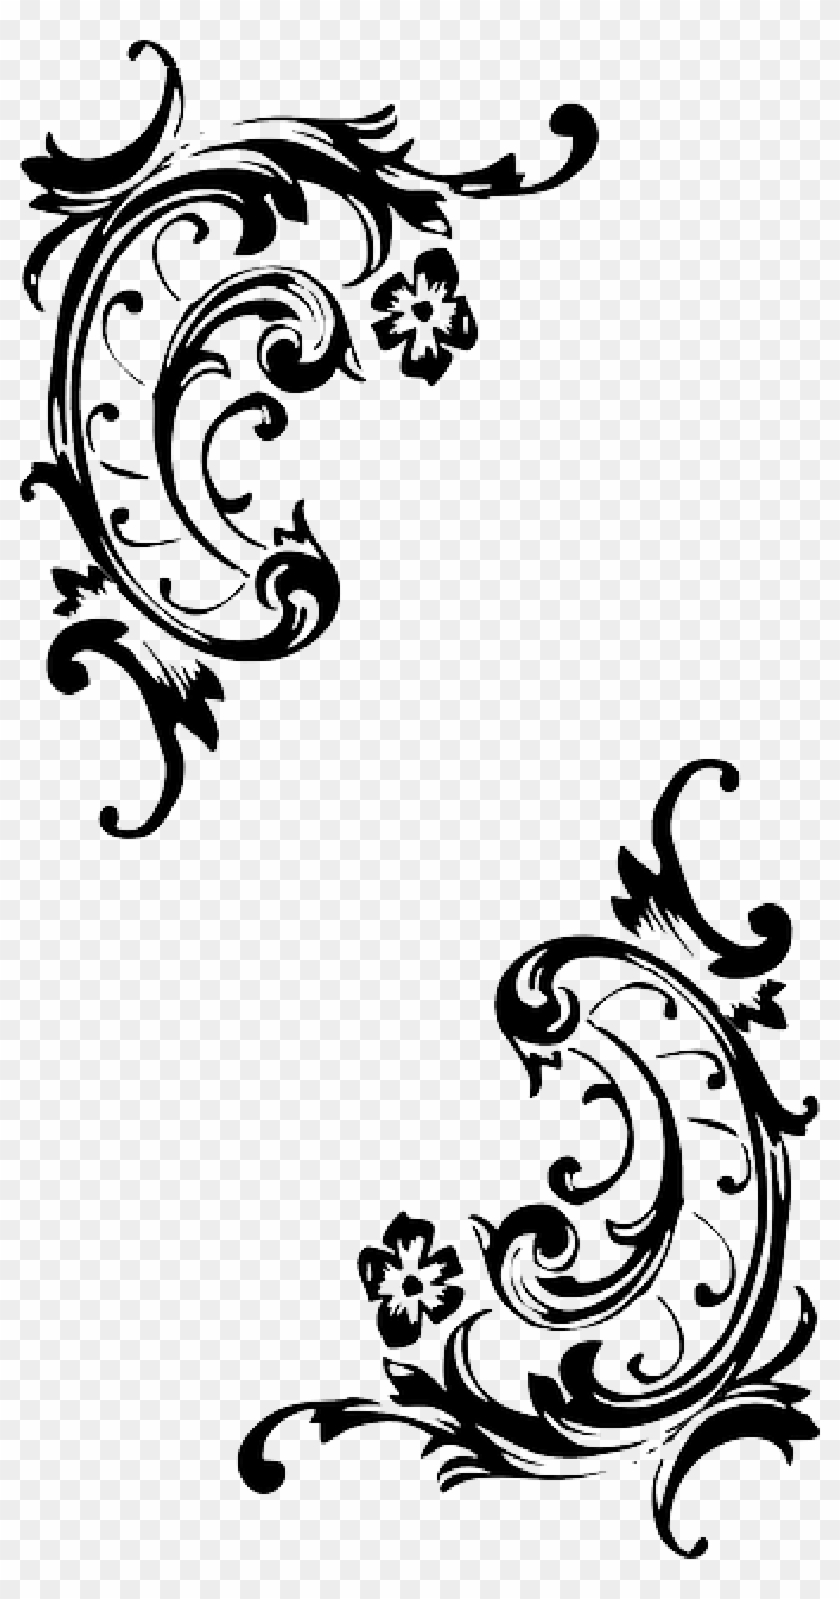 Scroll Clip Art Filigree Free For Download On Rpelm - Simple Baroque Art Design - Png Download #328334